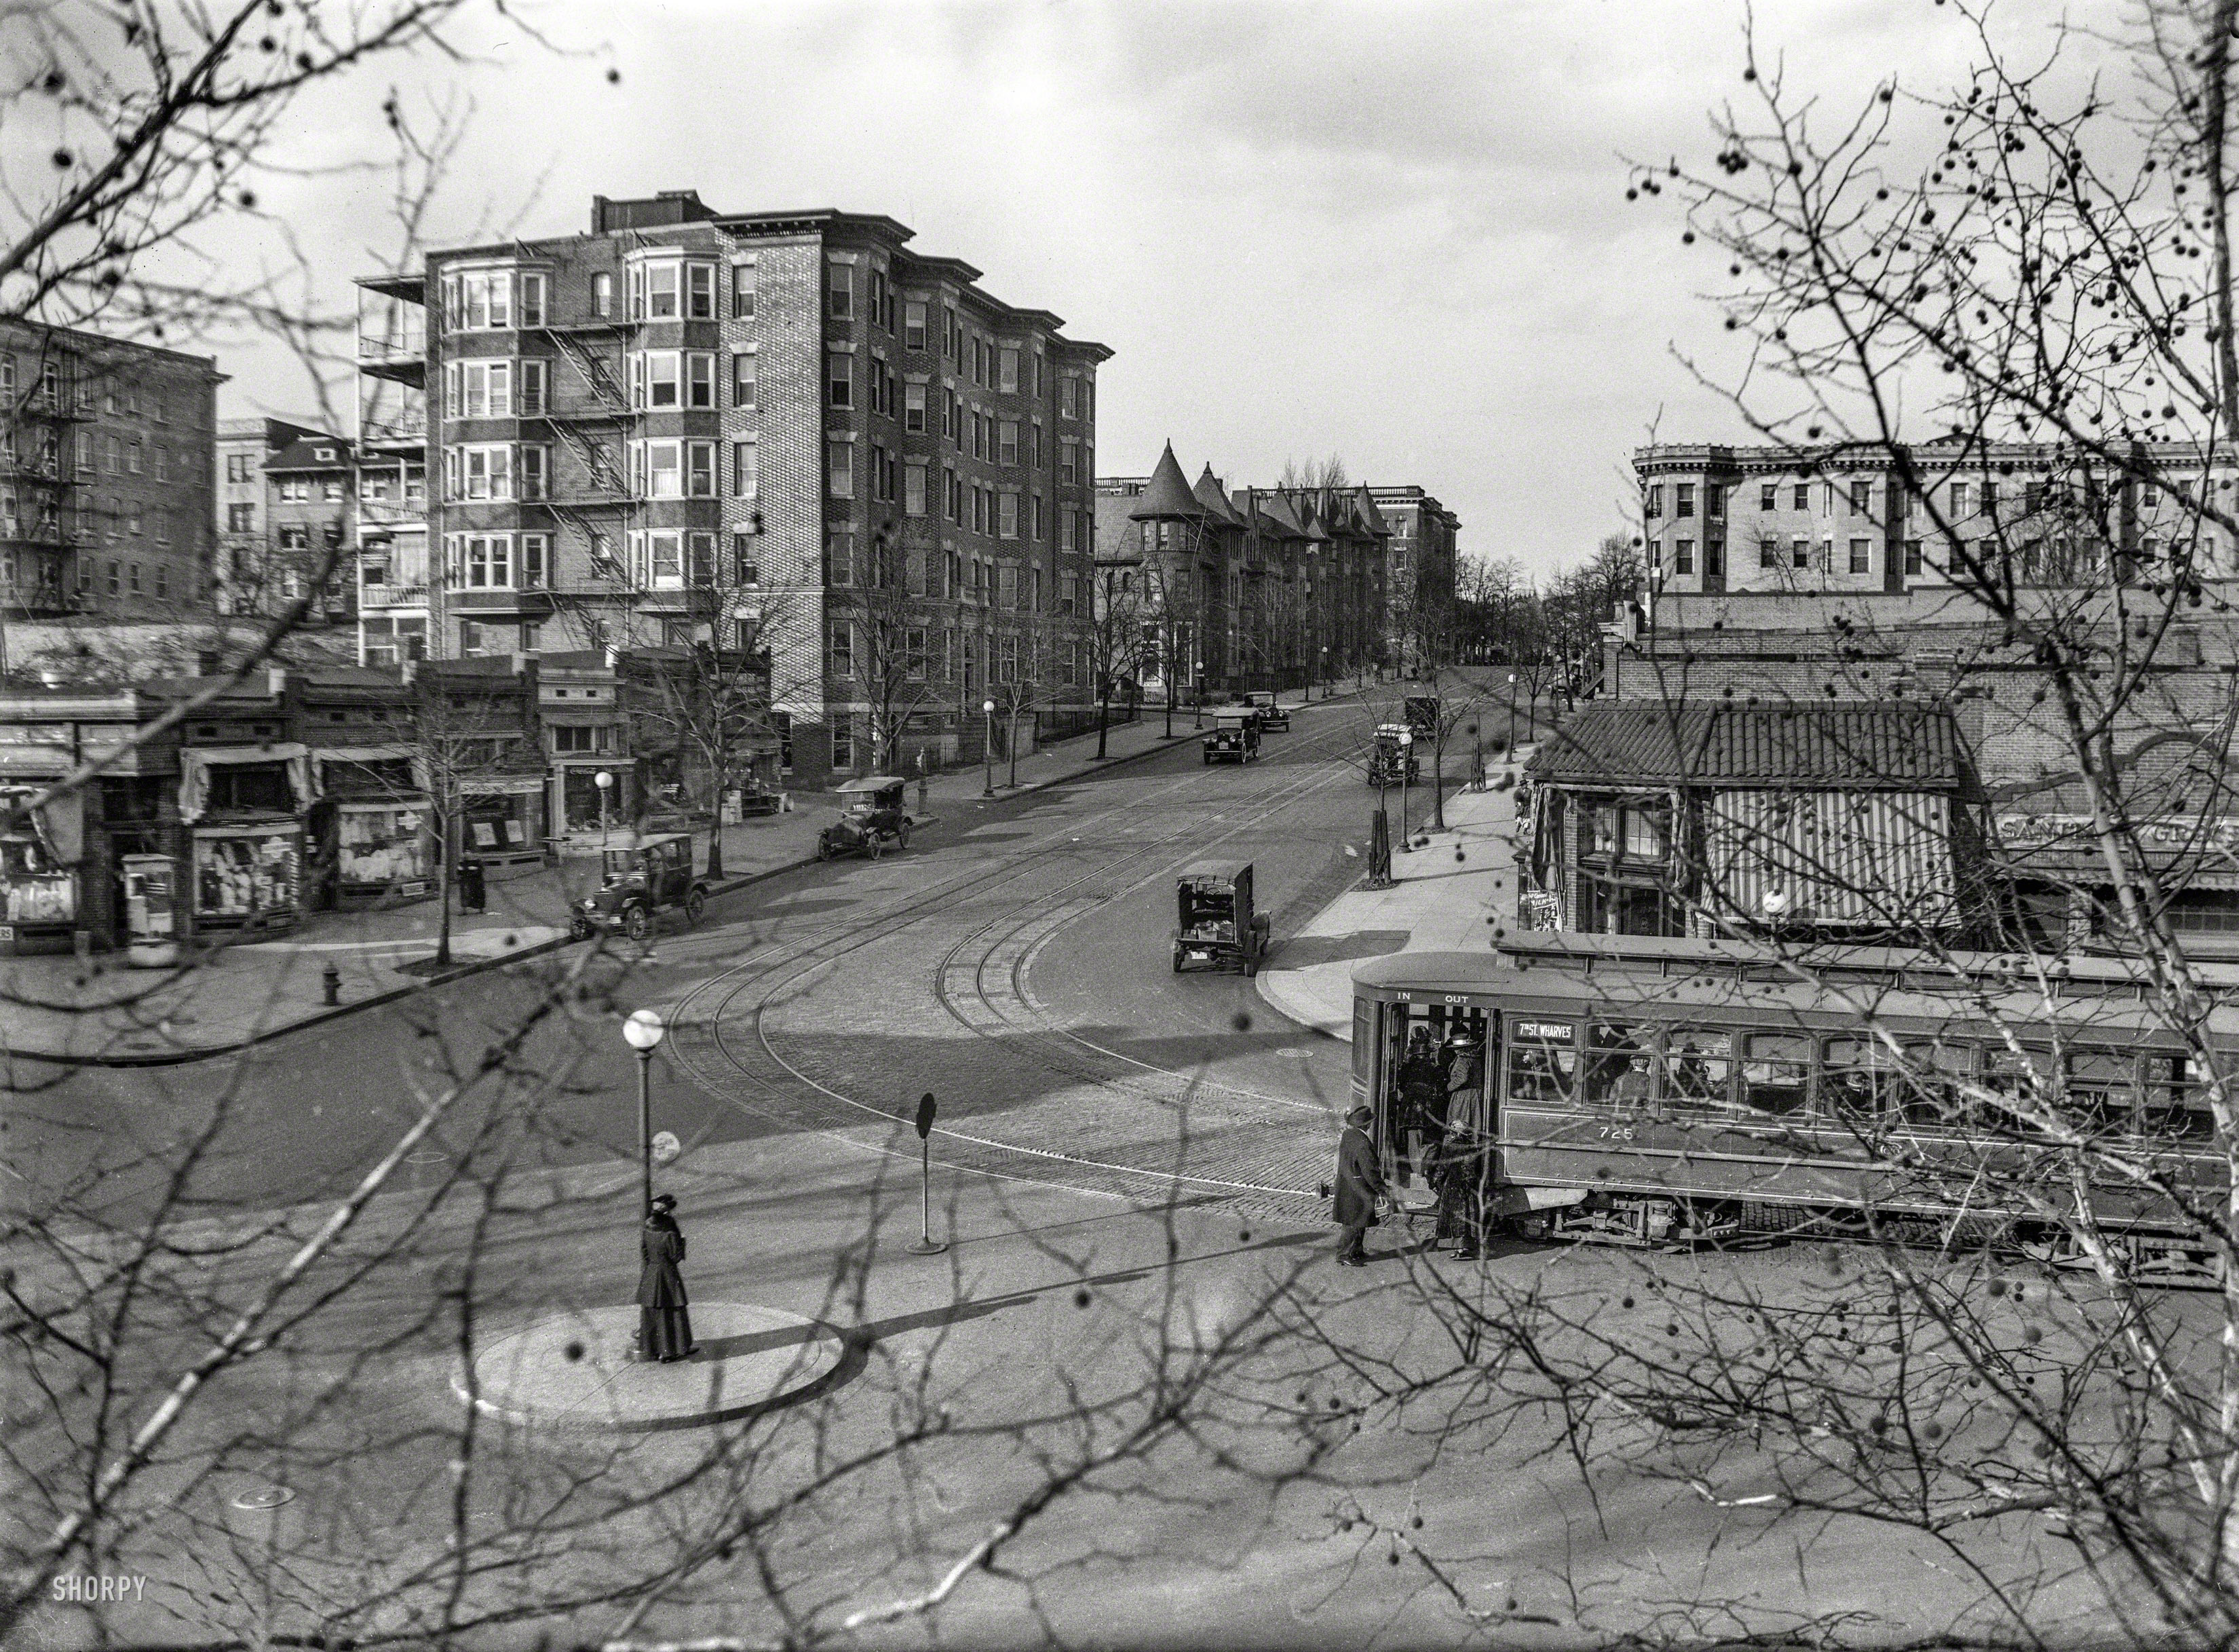 &nbsp; &nbsp; &nbsp; &nbsp; UPDATE: The intersection is 18th and U streets NW, on the edge of Adams-Morgan.
Washington, D.C., circa 1922. "NO CAPTION (Streetcar stop)." Our second sample from this series of traffic-related views. Who can locate the intersection? Harris & Ewing Collection glass negative. View full size.